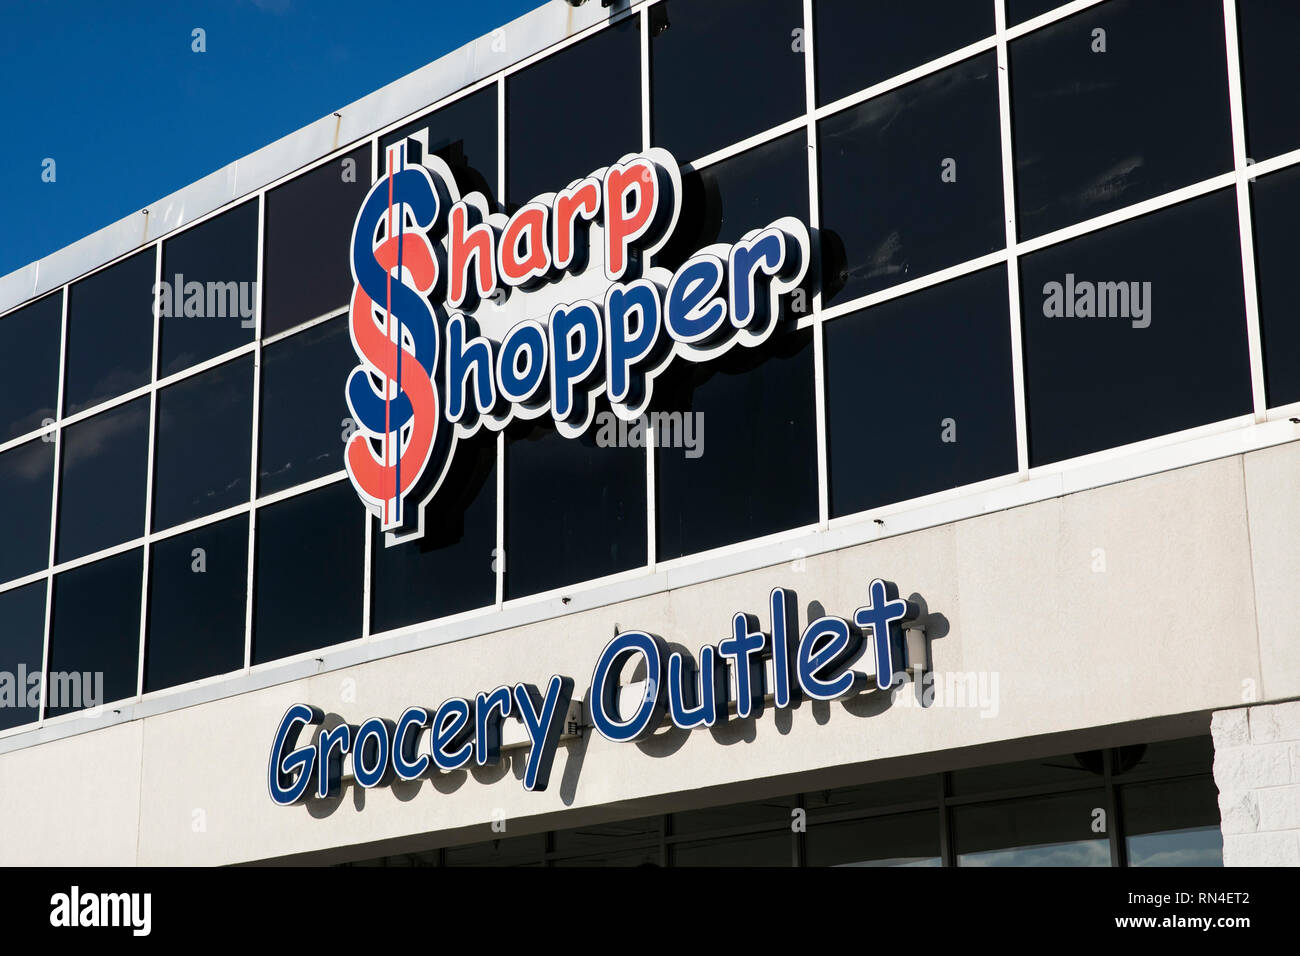 A logo sign outside of a Sharp Shopper Grocery Outlet store location in Winchester, Virginia on February 13, 2019. Stock Photo